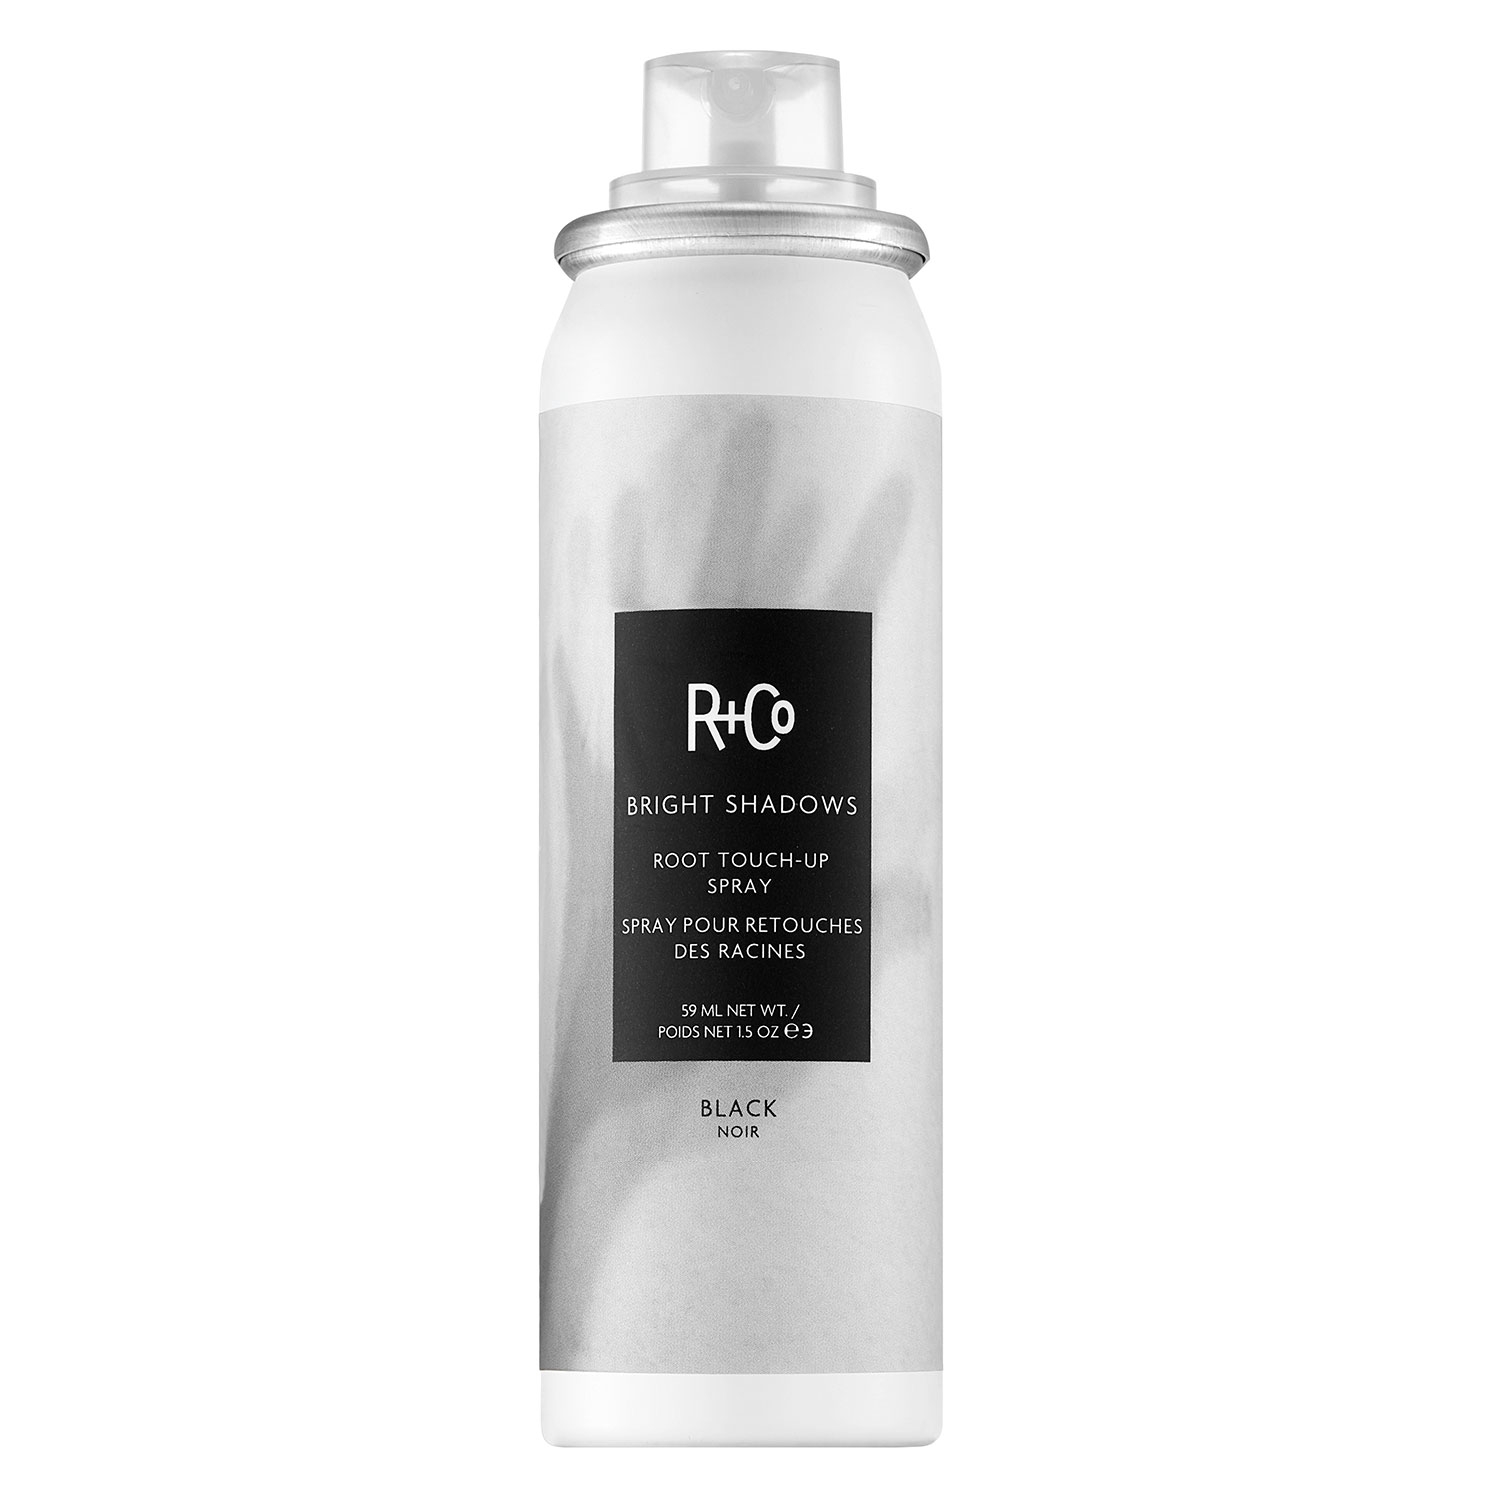 Product image from R+Co - Bright Shadows Root Touch-Up Spray Black